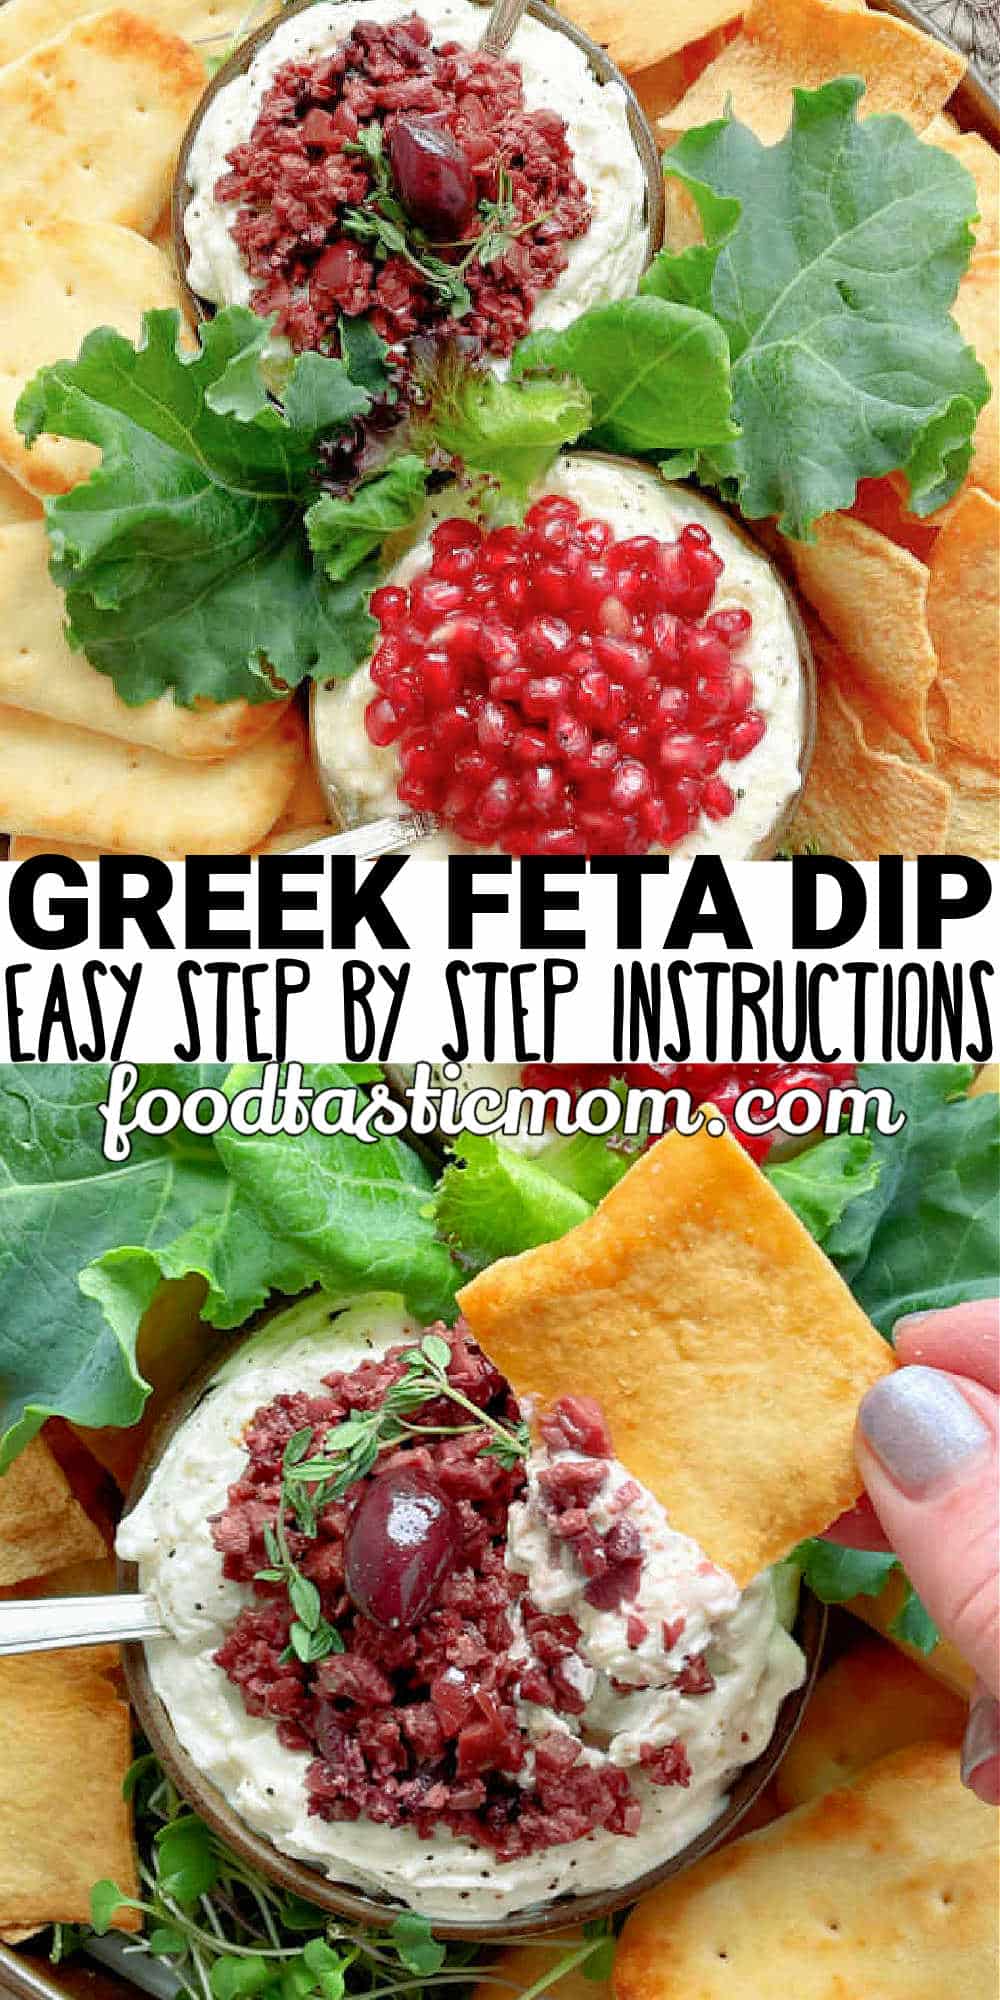 Greek Feta Dip is one simple dip to serve two ways! Sweet with honey or savory with lemon and olives. This is a beautiful appetizer for entertaining. via @foodtasticmom